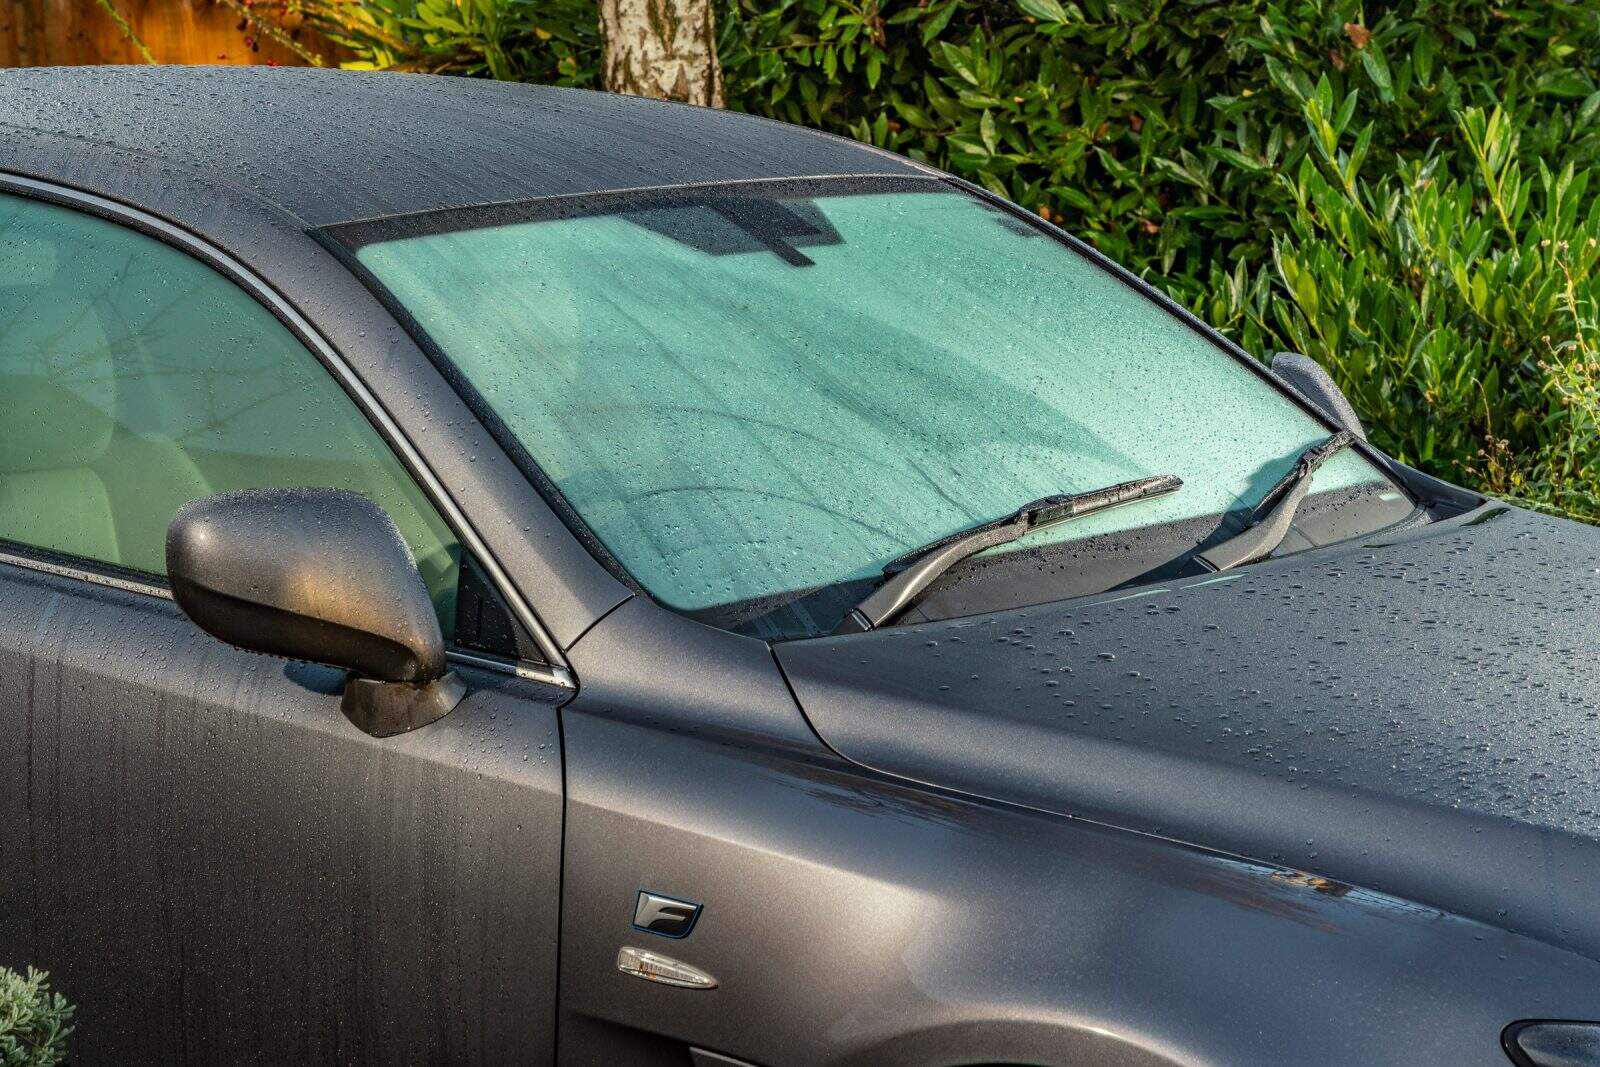 How To Get Rid Of Condensation On Car Windows